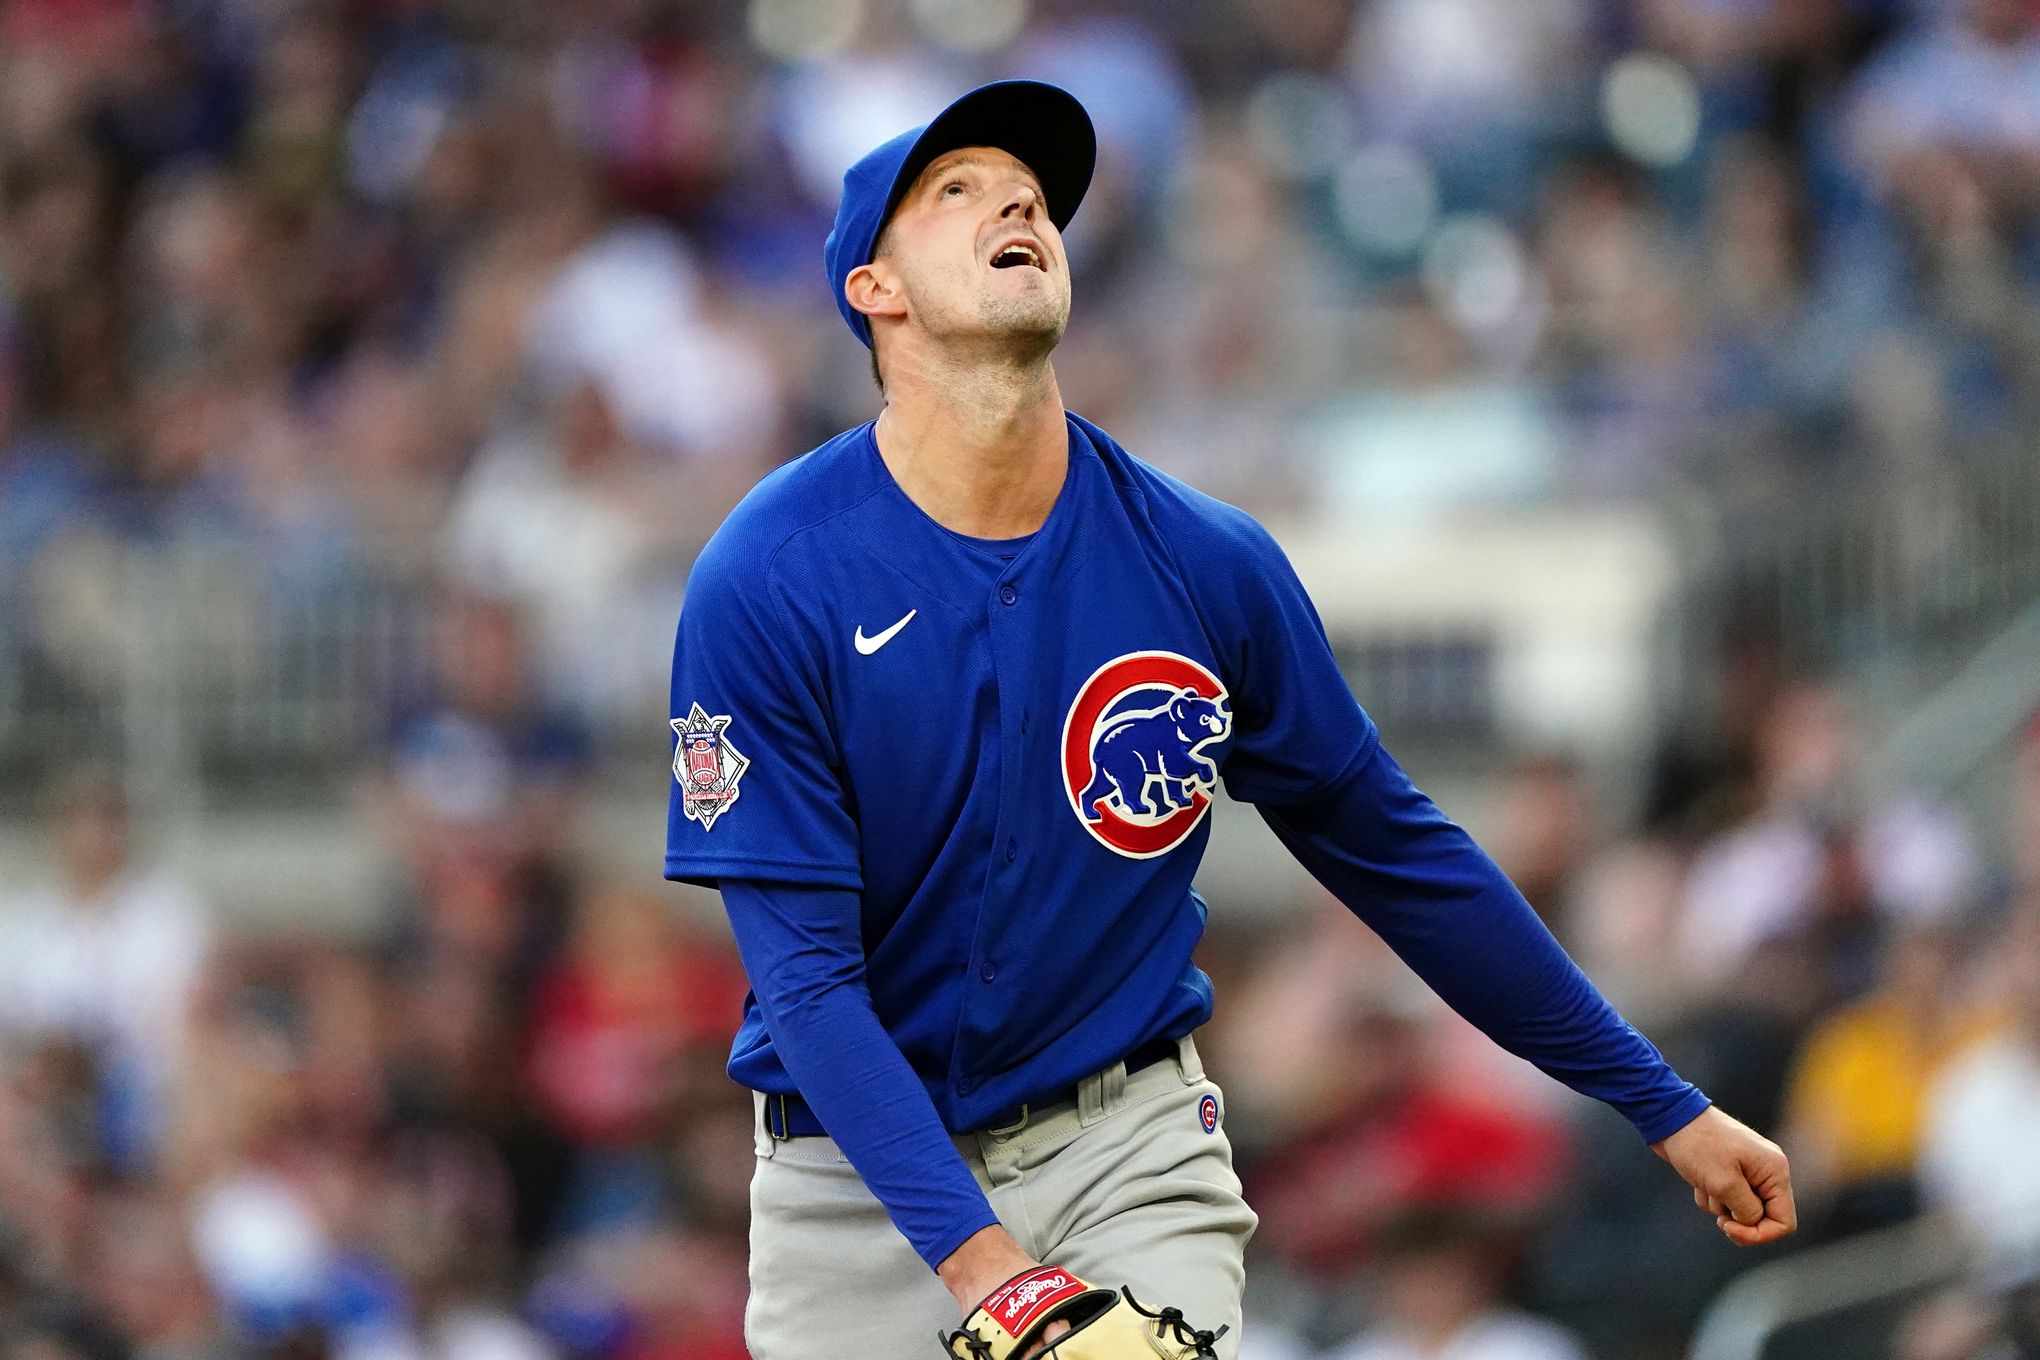 Cubs place LHP Drew Smyly on bereavement list